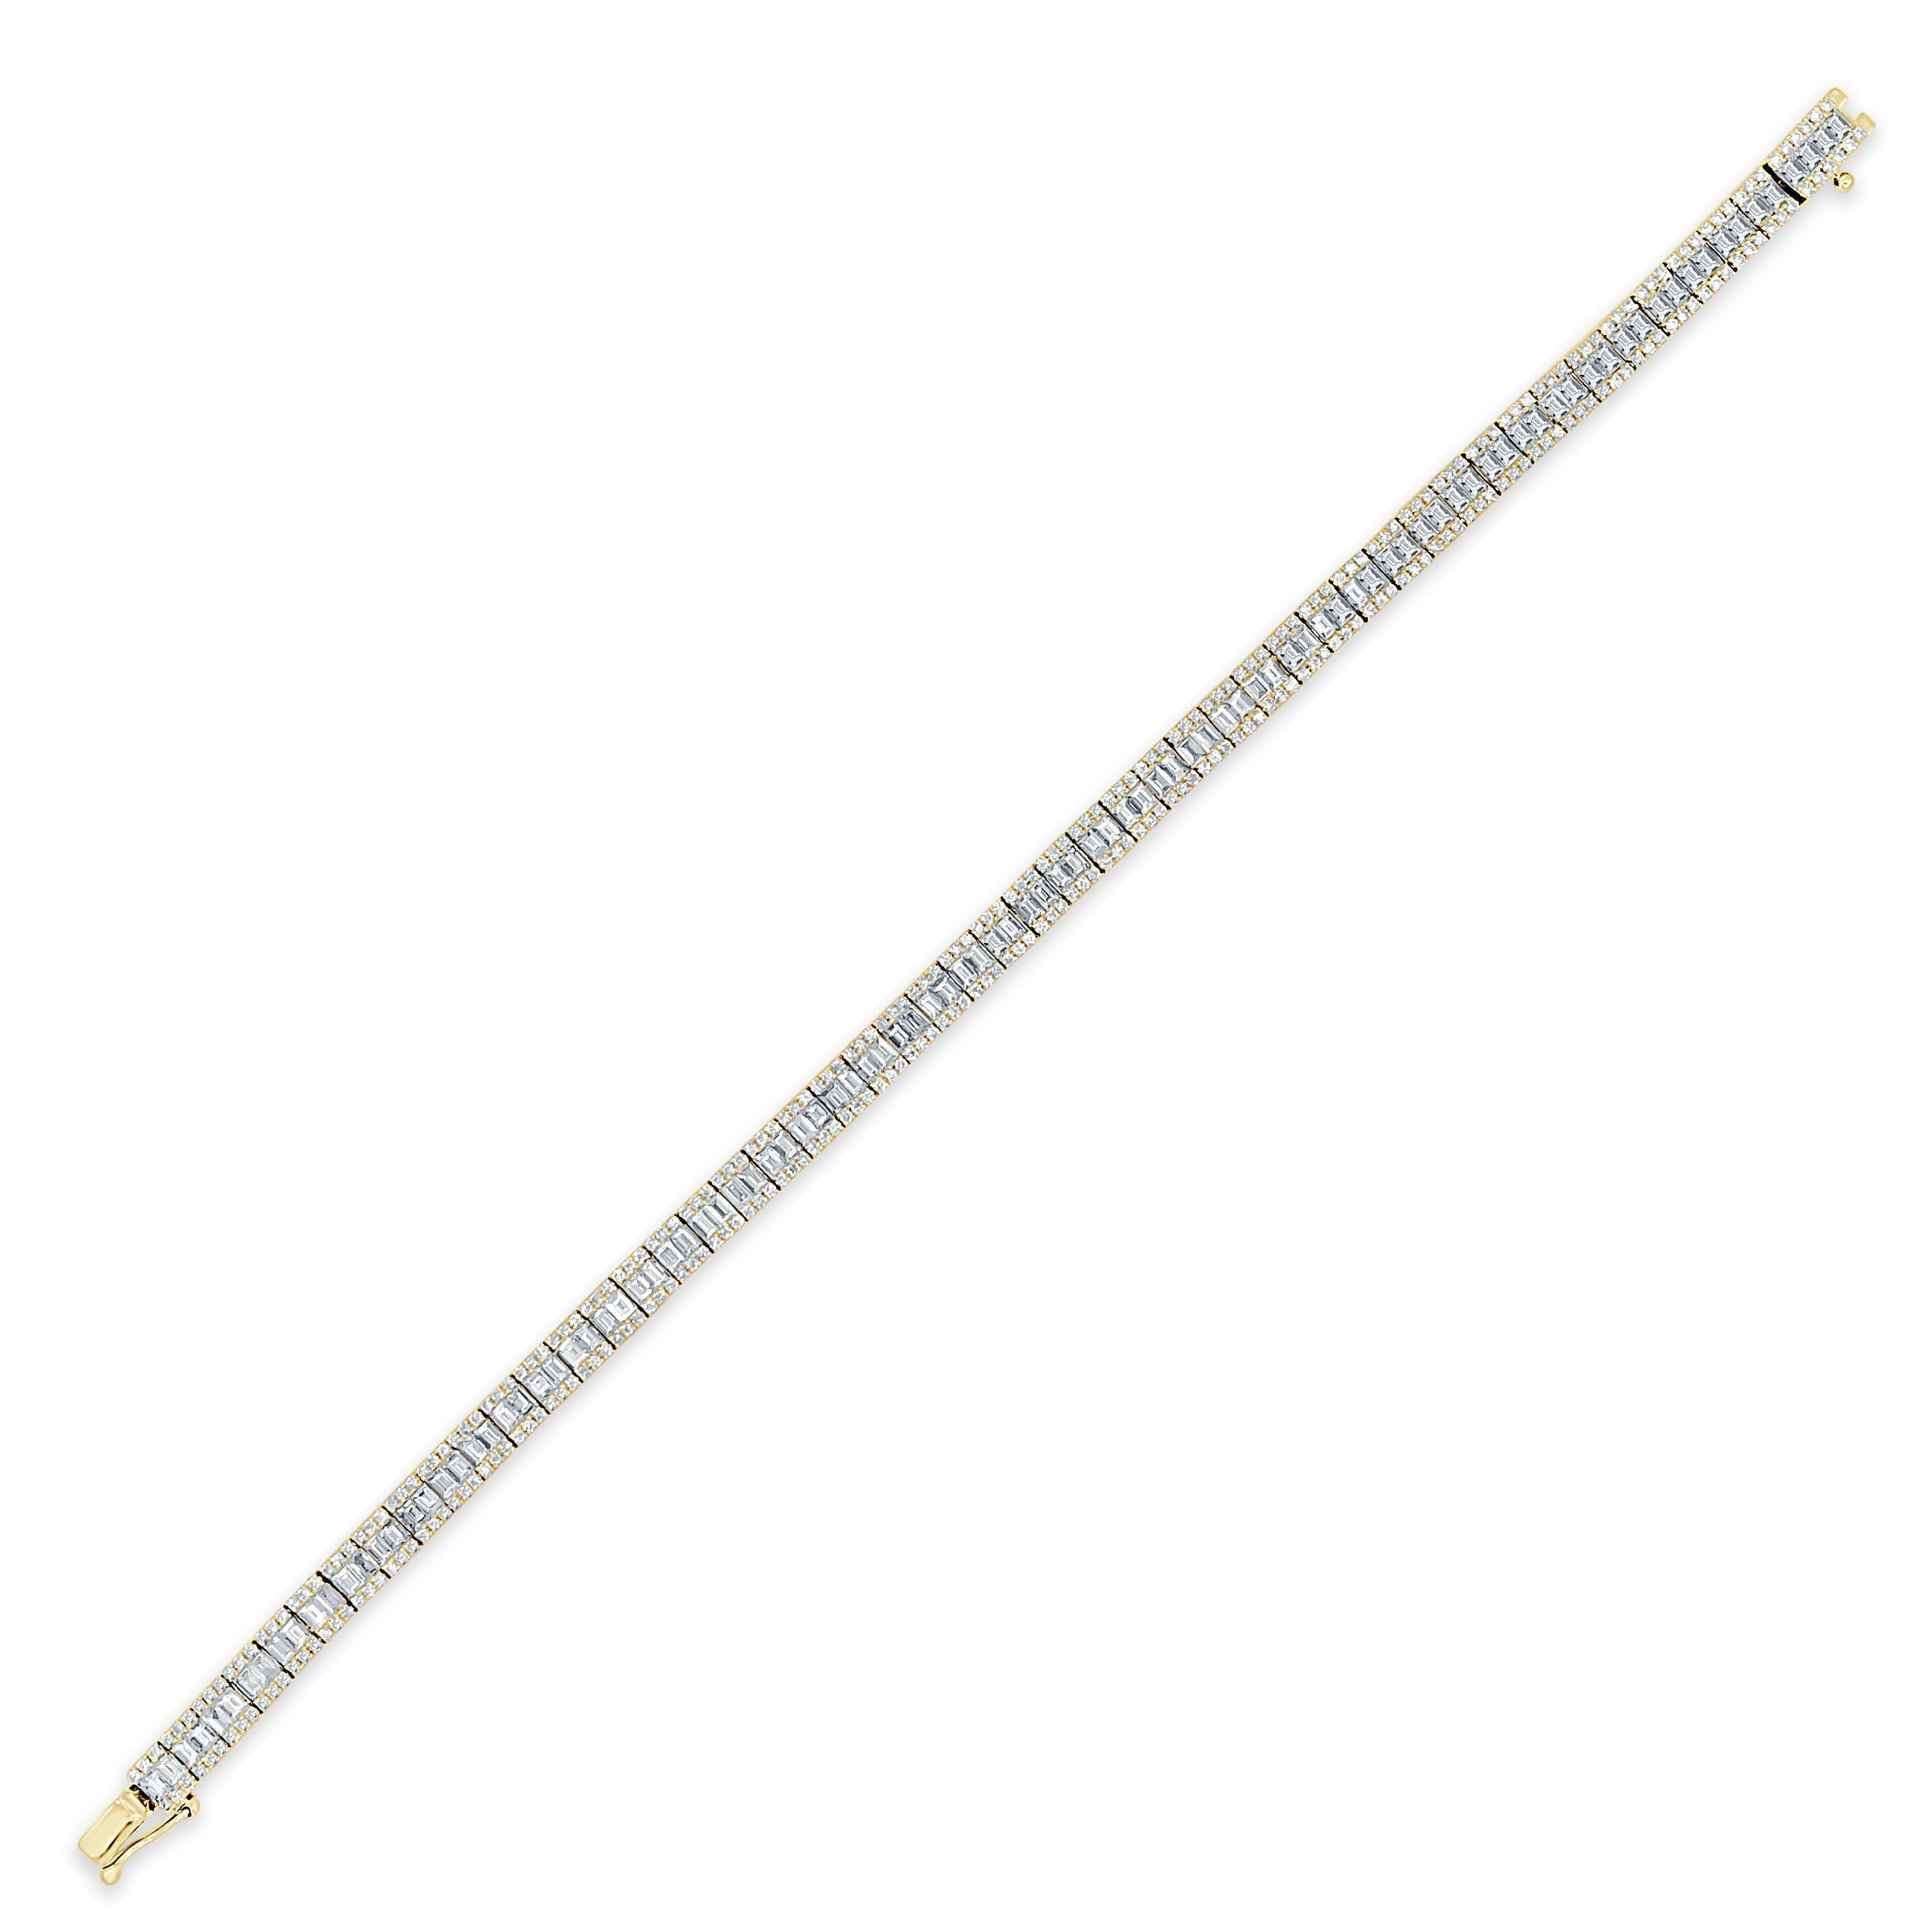 Quality Diamond Bracelet: Focused on design and detail, this diamond bracelet features 3.26cts of 104 Natural Baguette Diamonds and 1.14 cts of 314 Natural Round Diamonds - Certified Diamonds. Is crafted of 14k gold. Diamond Color and Clarity